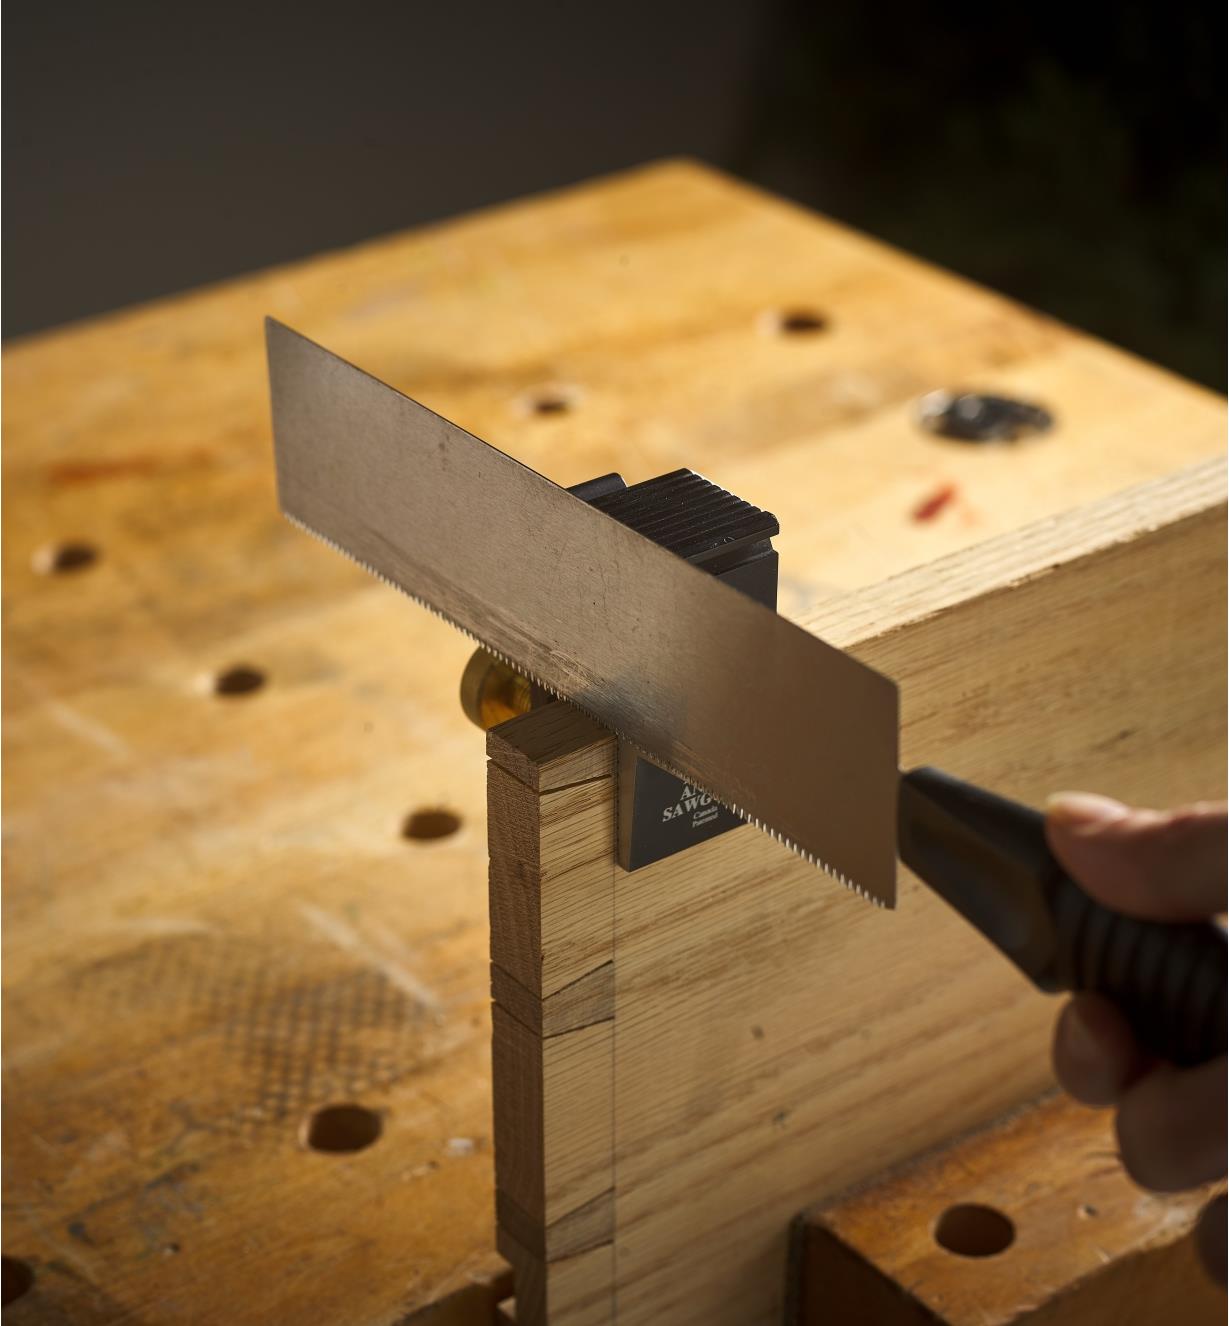 A saw flush against a Veritas Dovetail Guide that is clamped to a workpiece